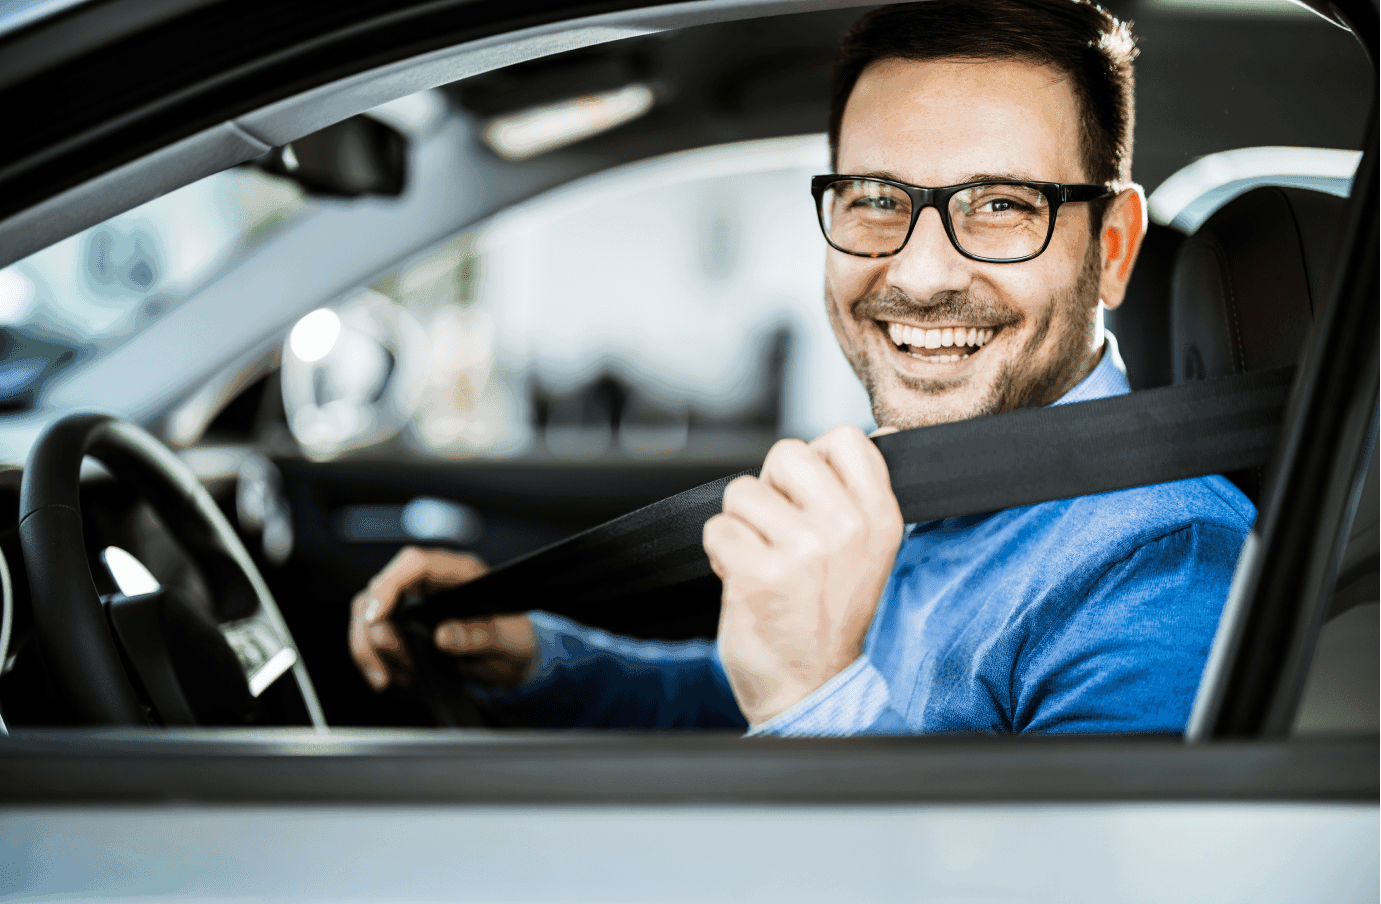 Smiling executive with glasses fastening his seat belt